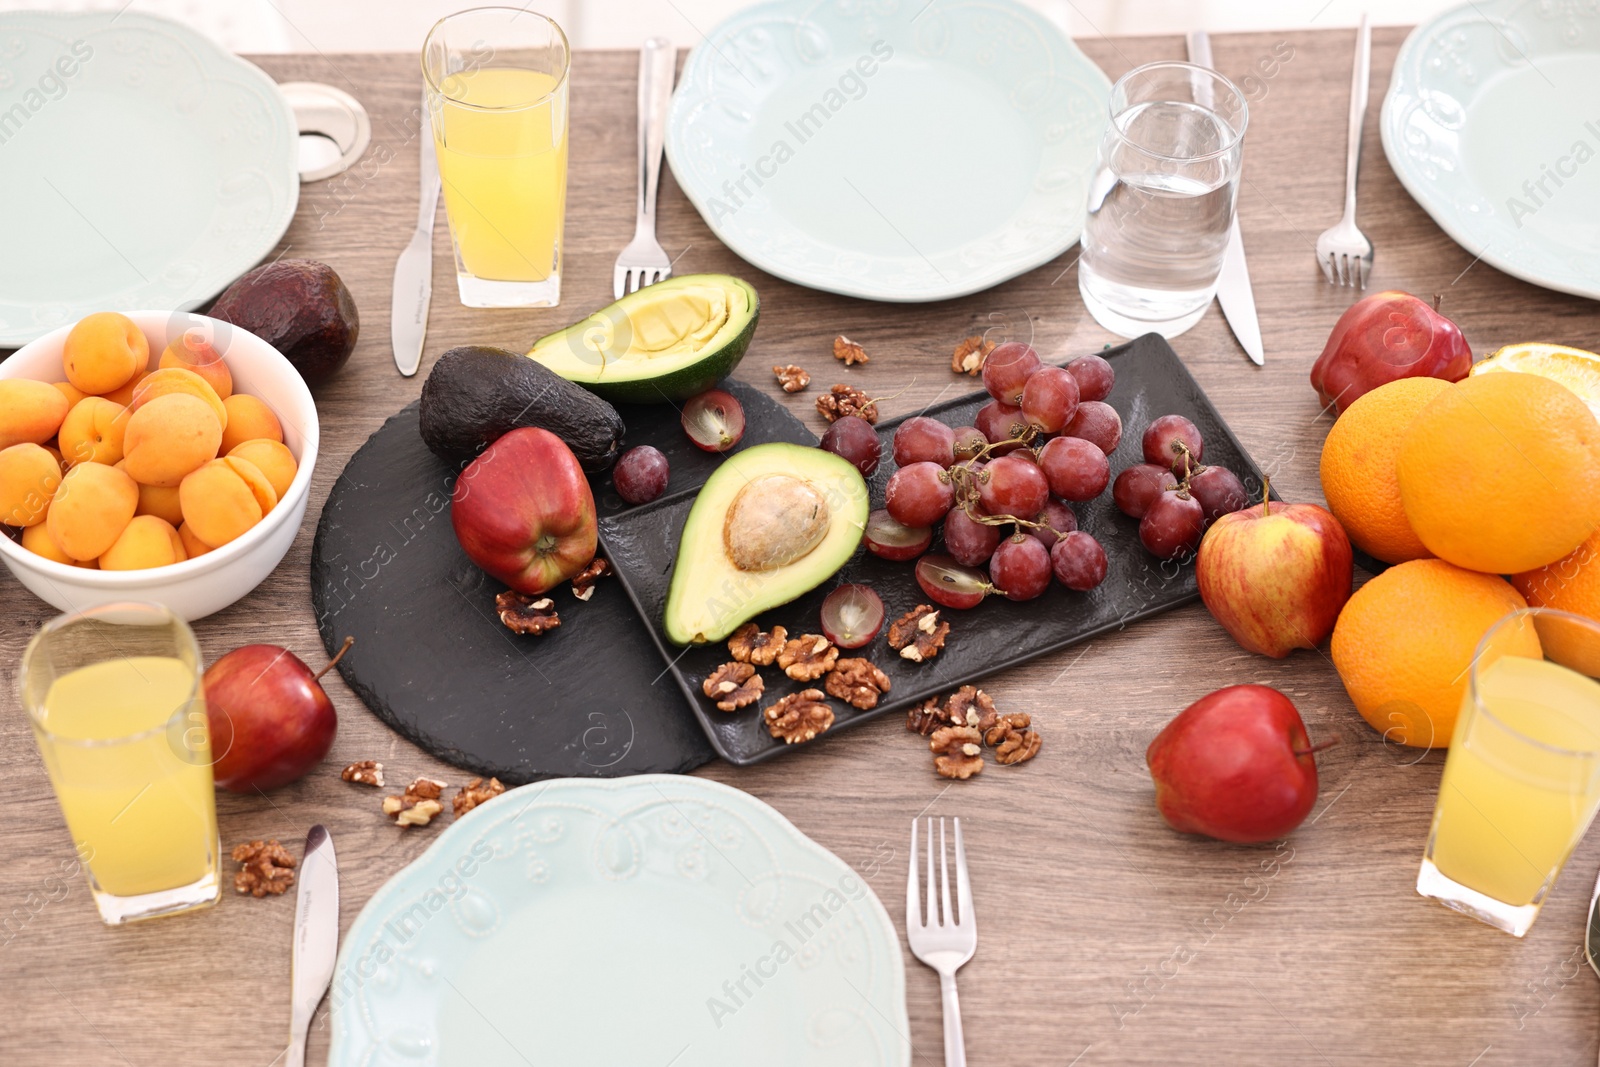 Photo of Healthy vegetarian food, glasses of juice, plates and cutlery on wooden table